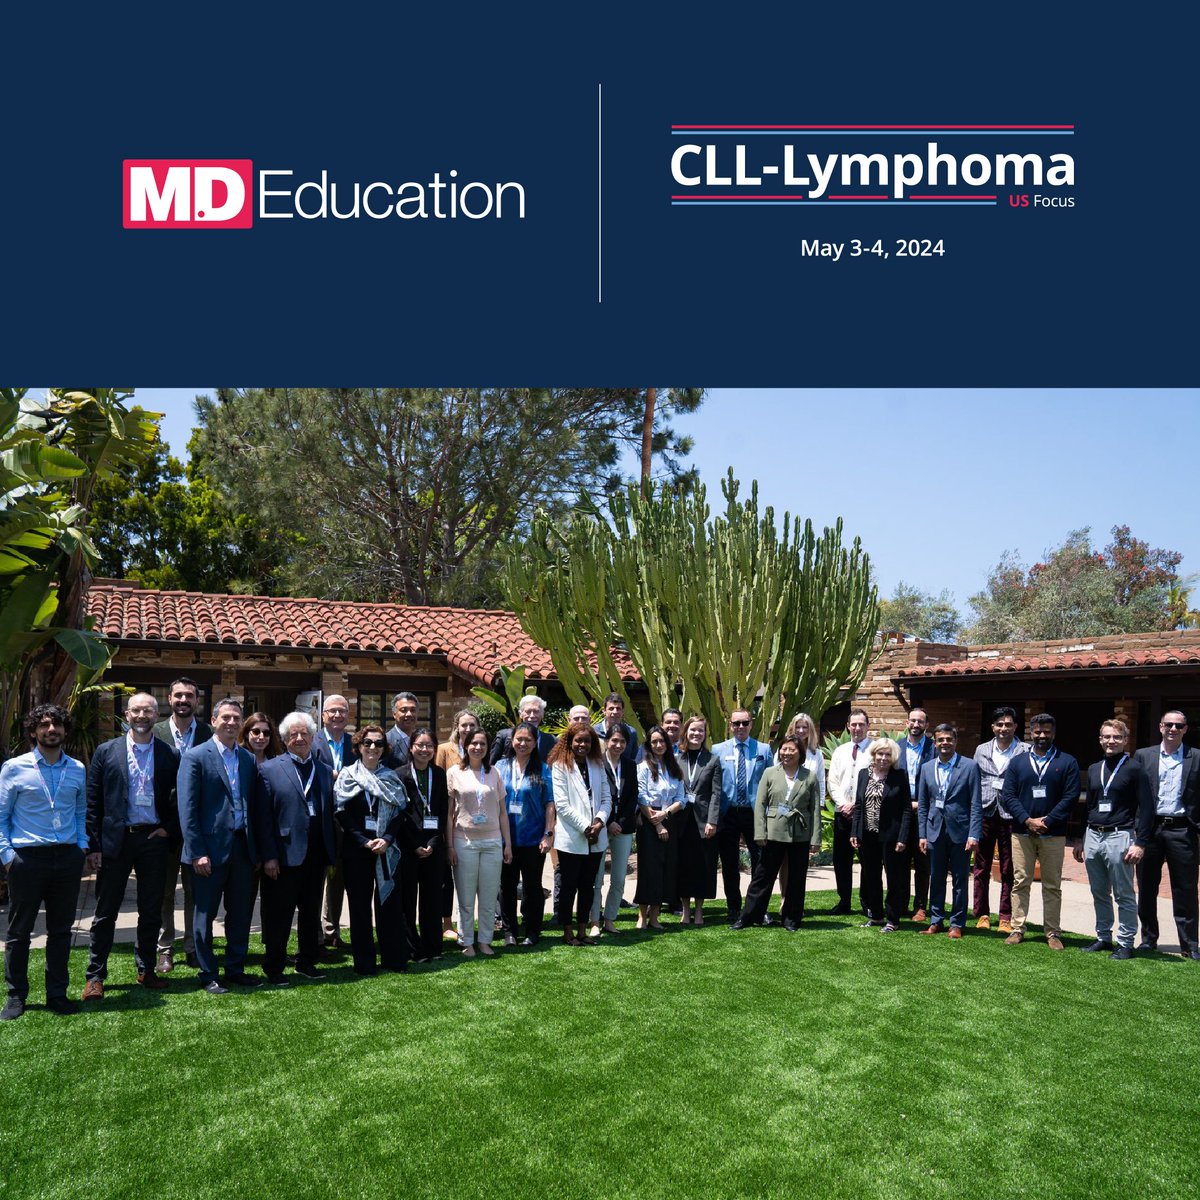 ✨ Our CLL-Lymphoma US Focus meeting took place last weekend, with 45 KOLs and fellows joining us to share their knowledge ✨ The 3rd annual meeting was a great success with informative presentations, debates and panel discussions on the latest research and treatment options in